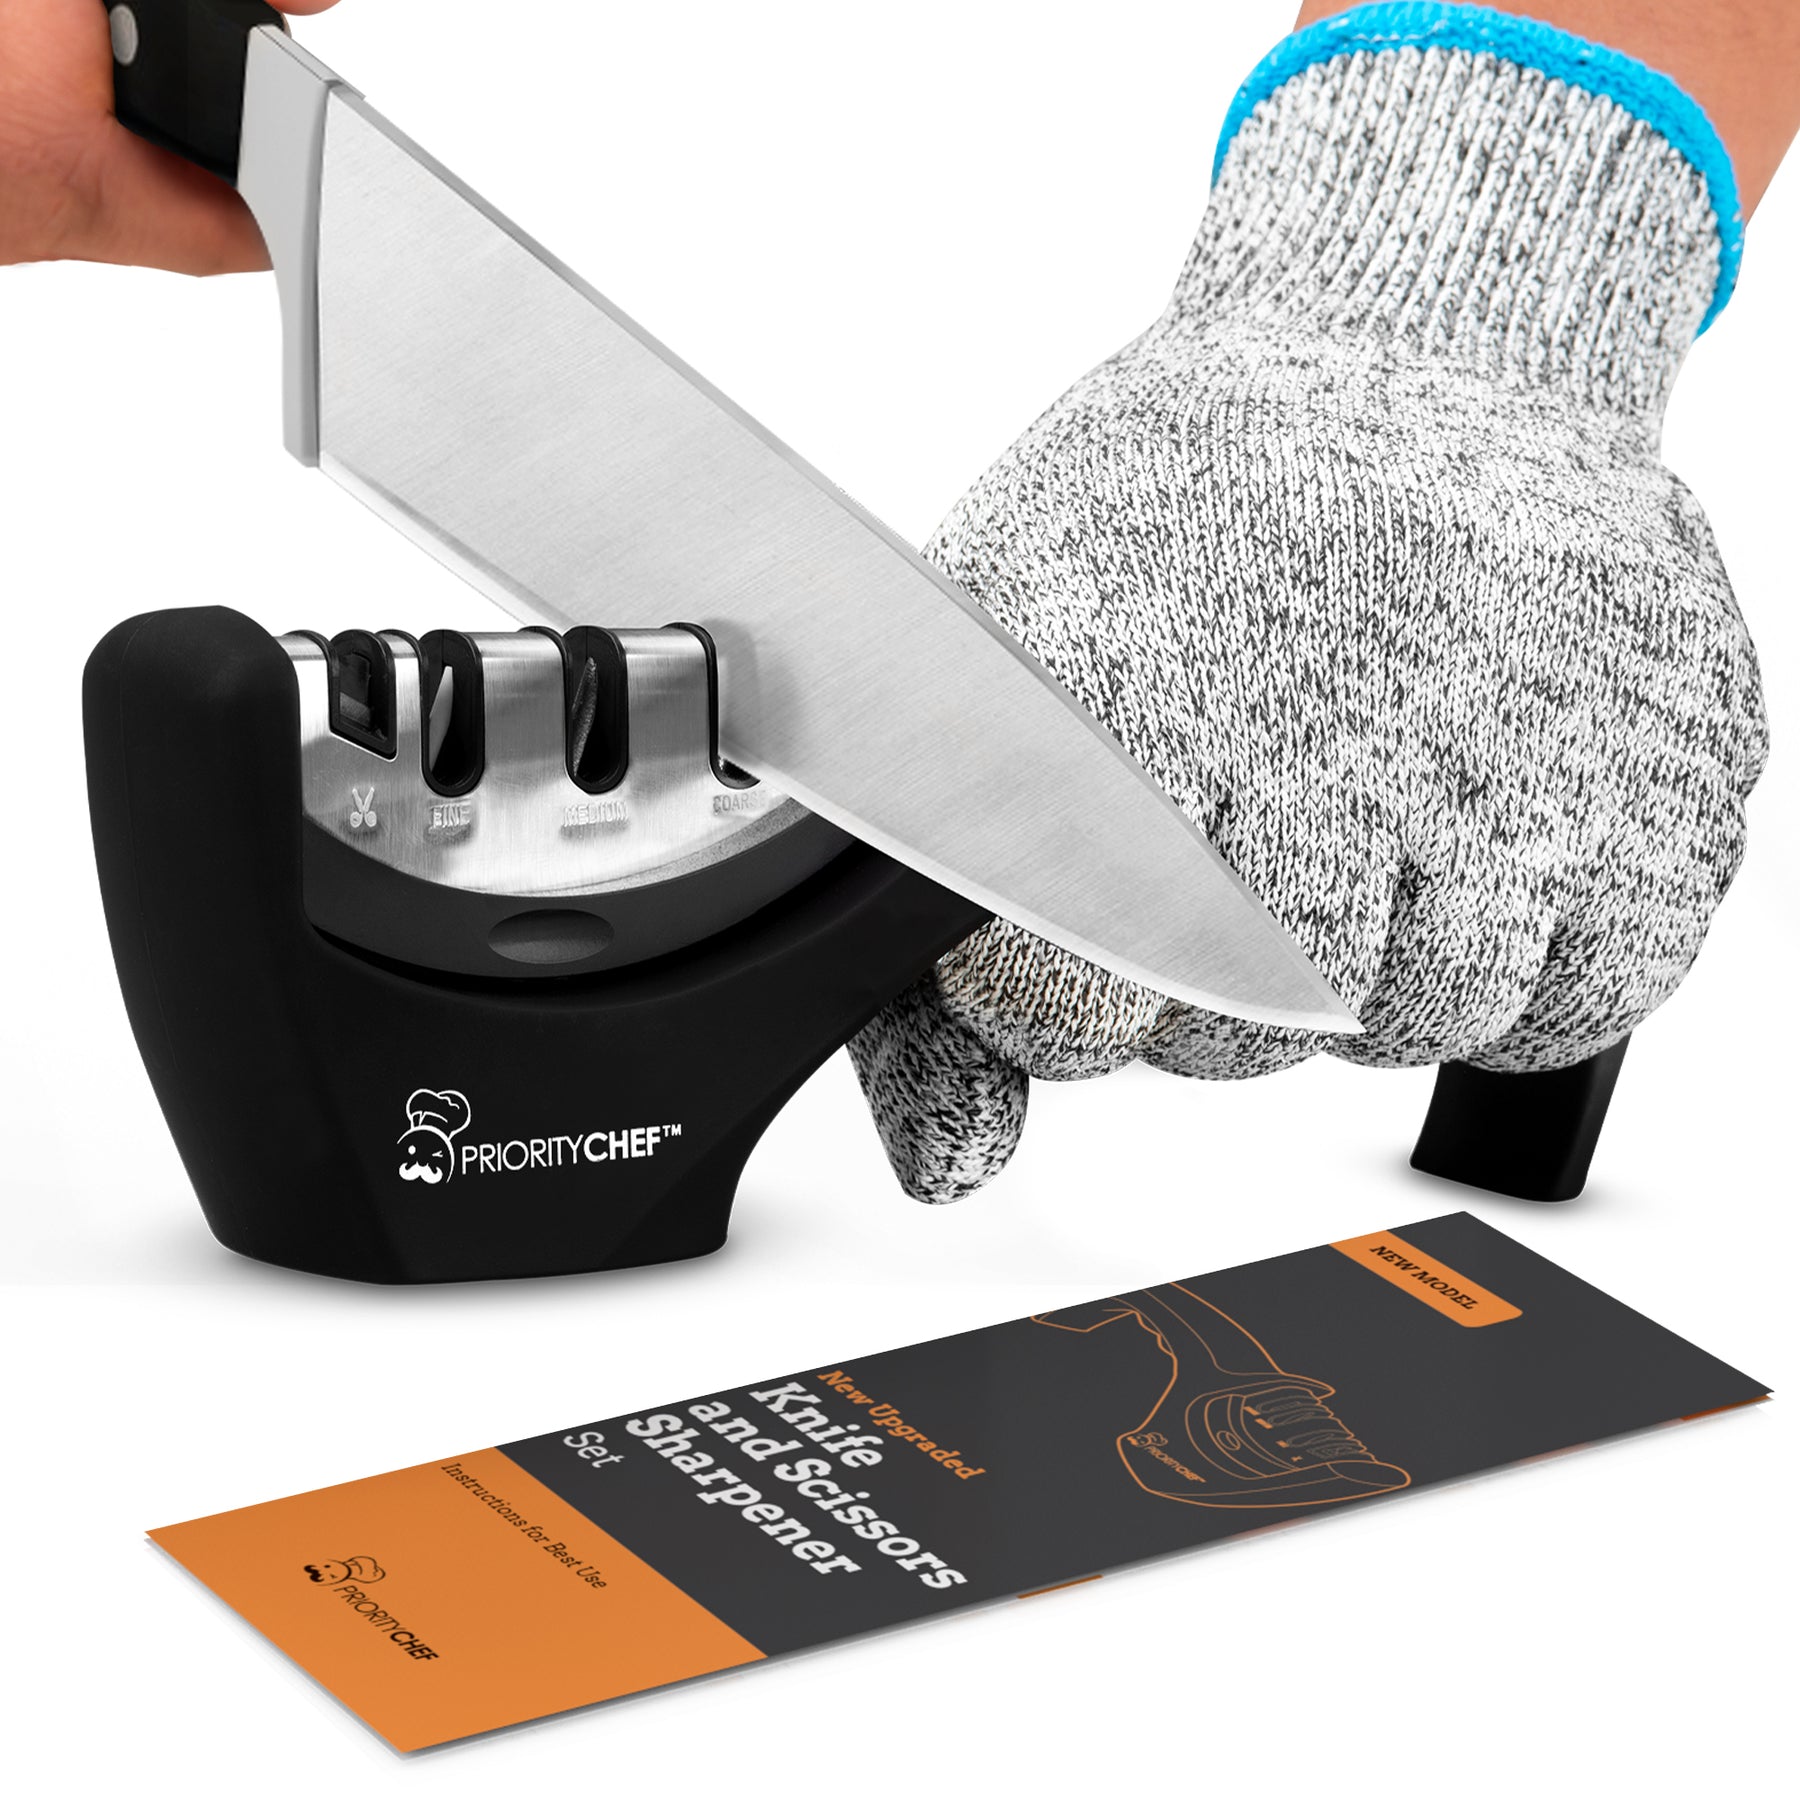 Clerance! 4-in-1, 3-Stage Best Knife Sharpener for Hunting, Heavy Duty  Diamond Blade Really Works for Ceramic, Steel Knives and Scissors 